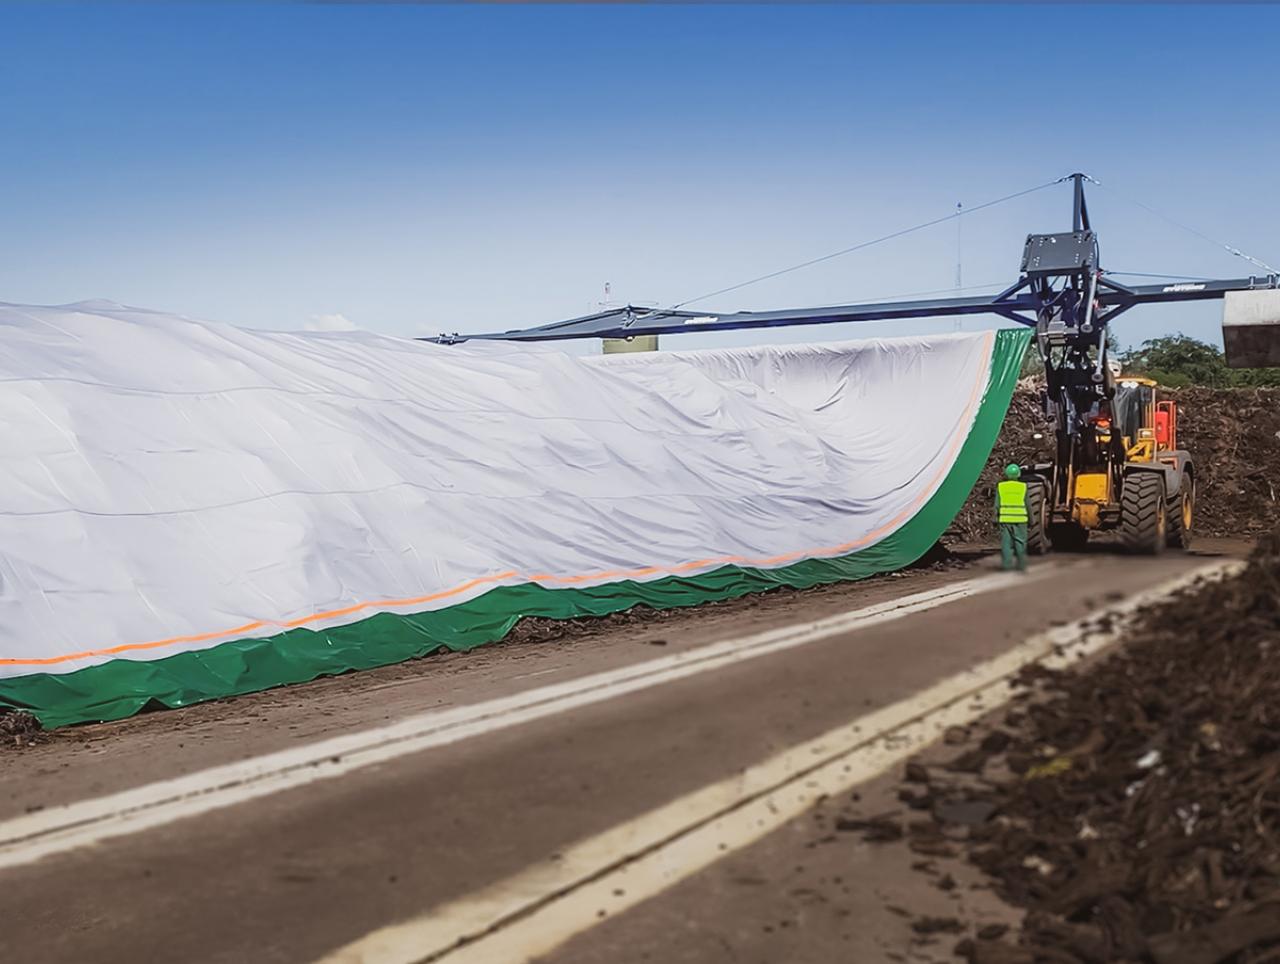 Windrow composting with membrane